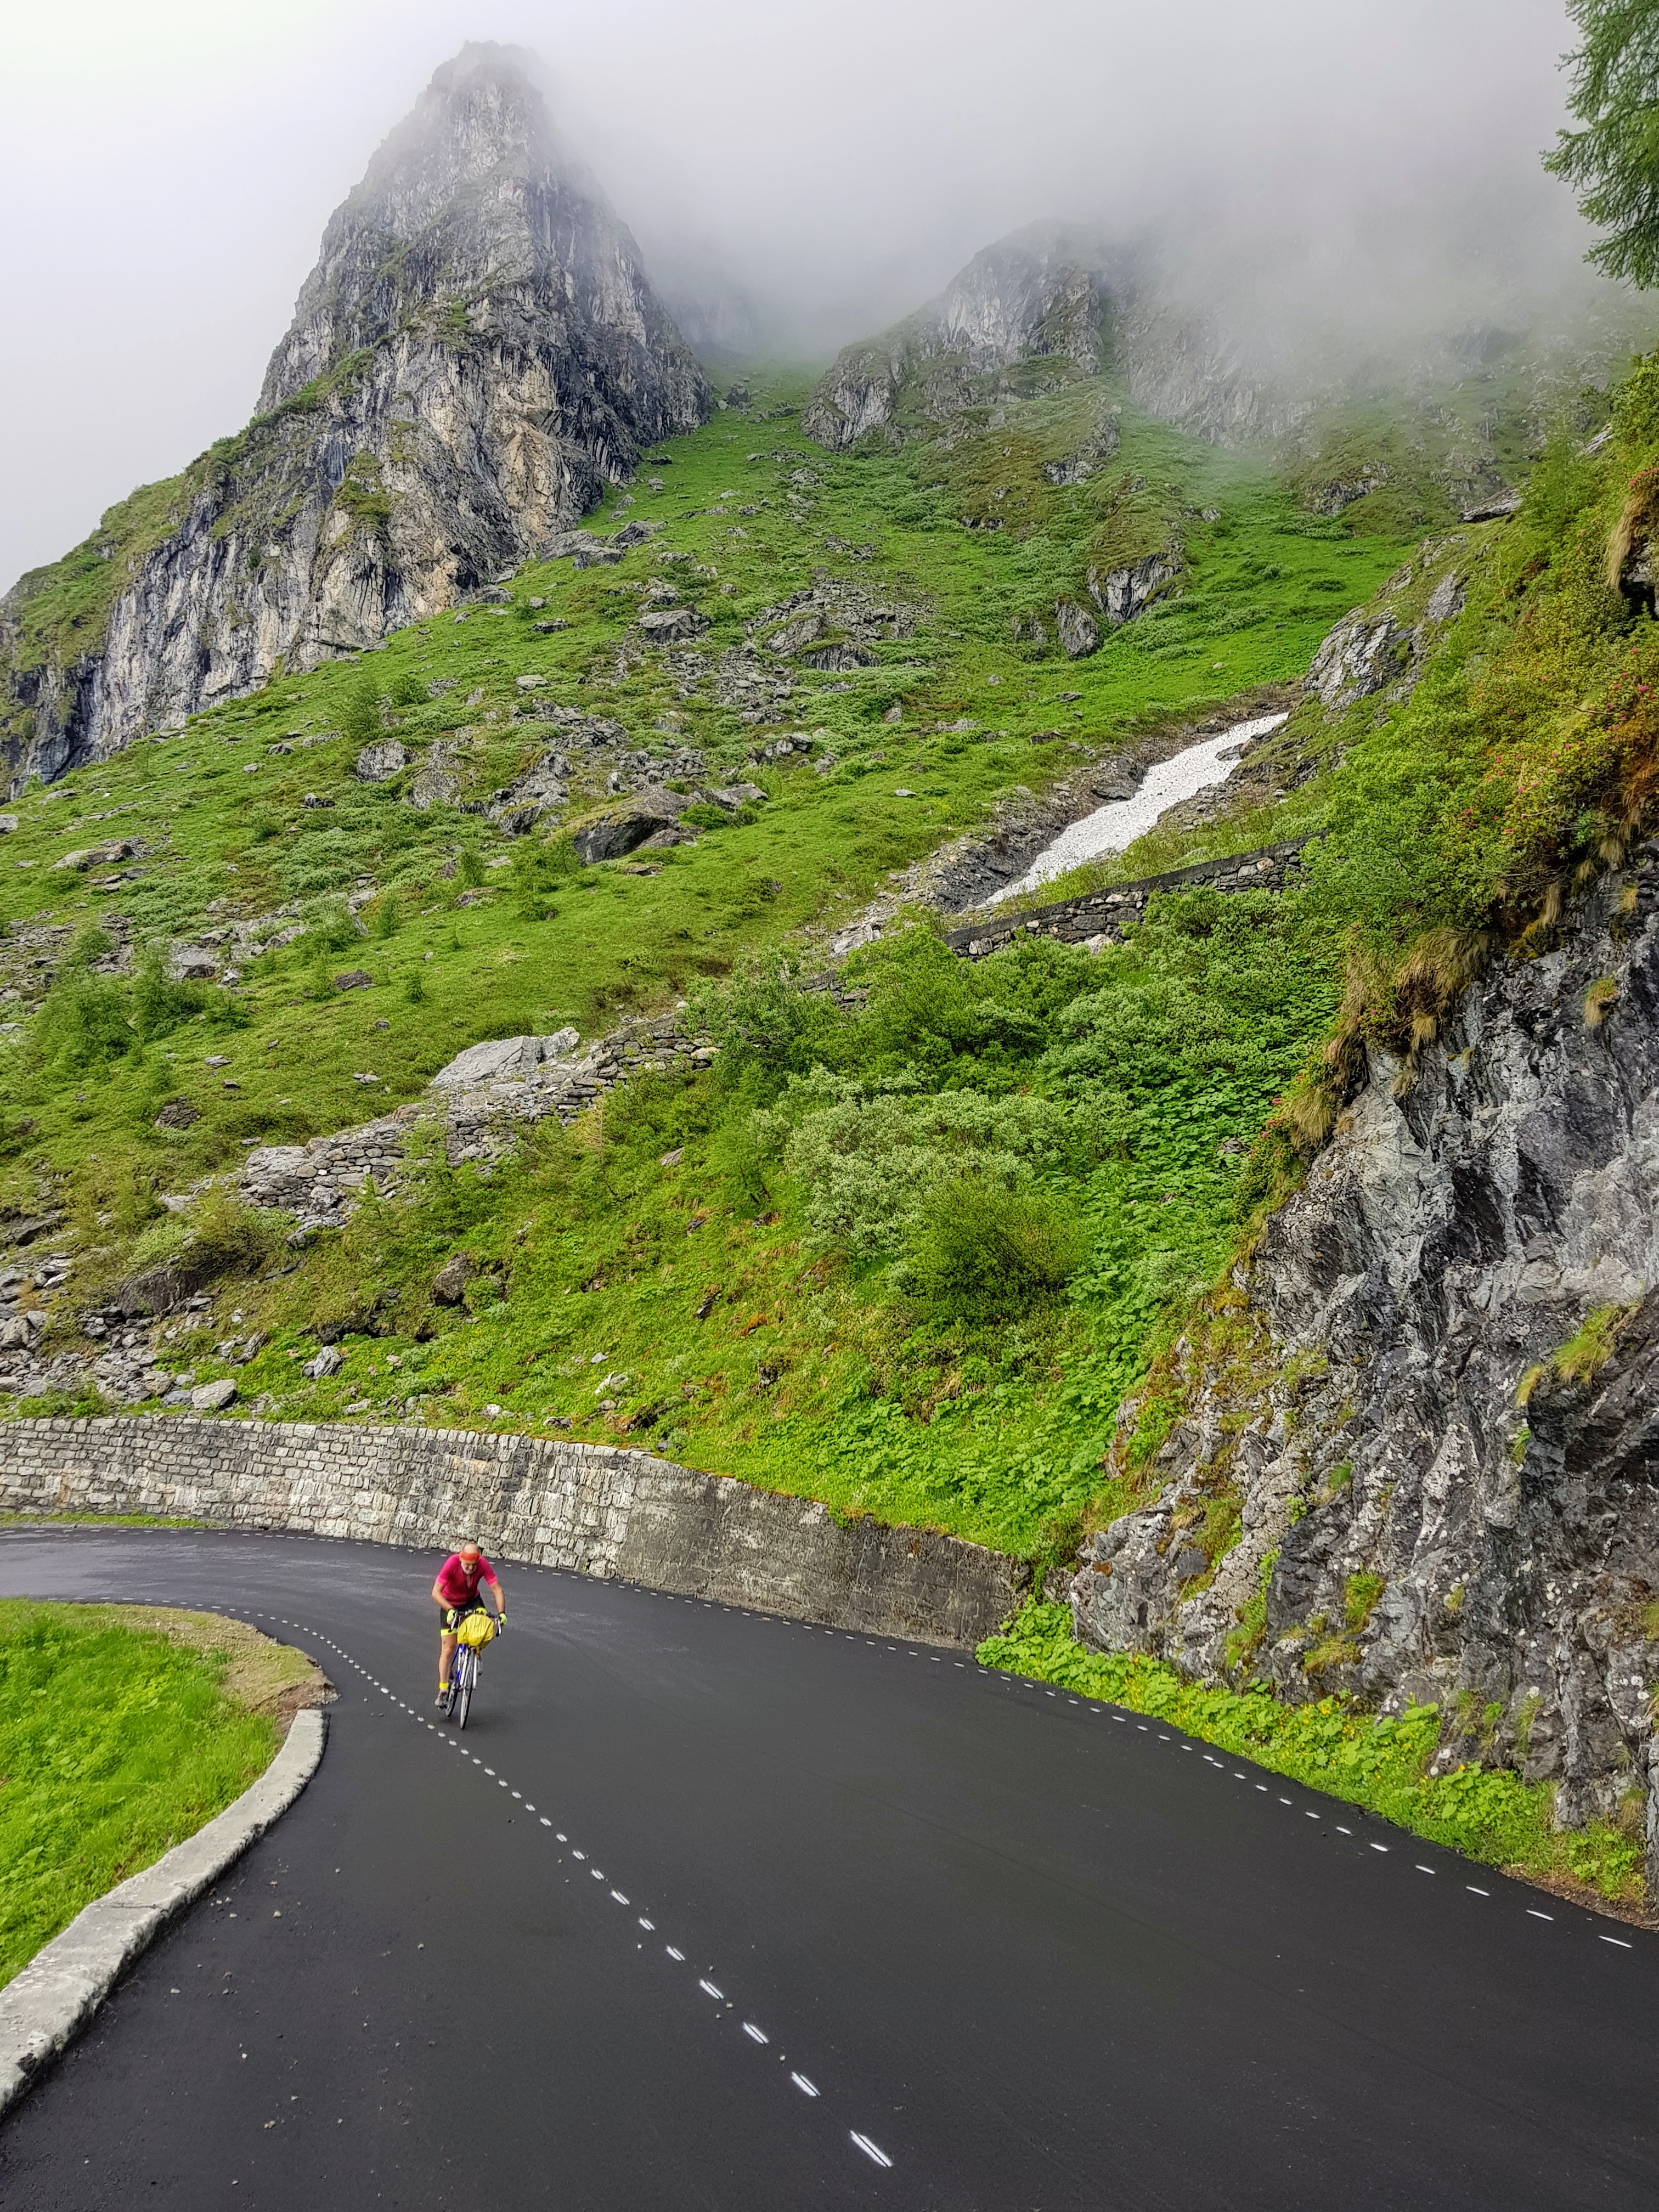 cycling companion wanted for climbing mountain passes in Spain